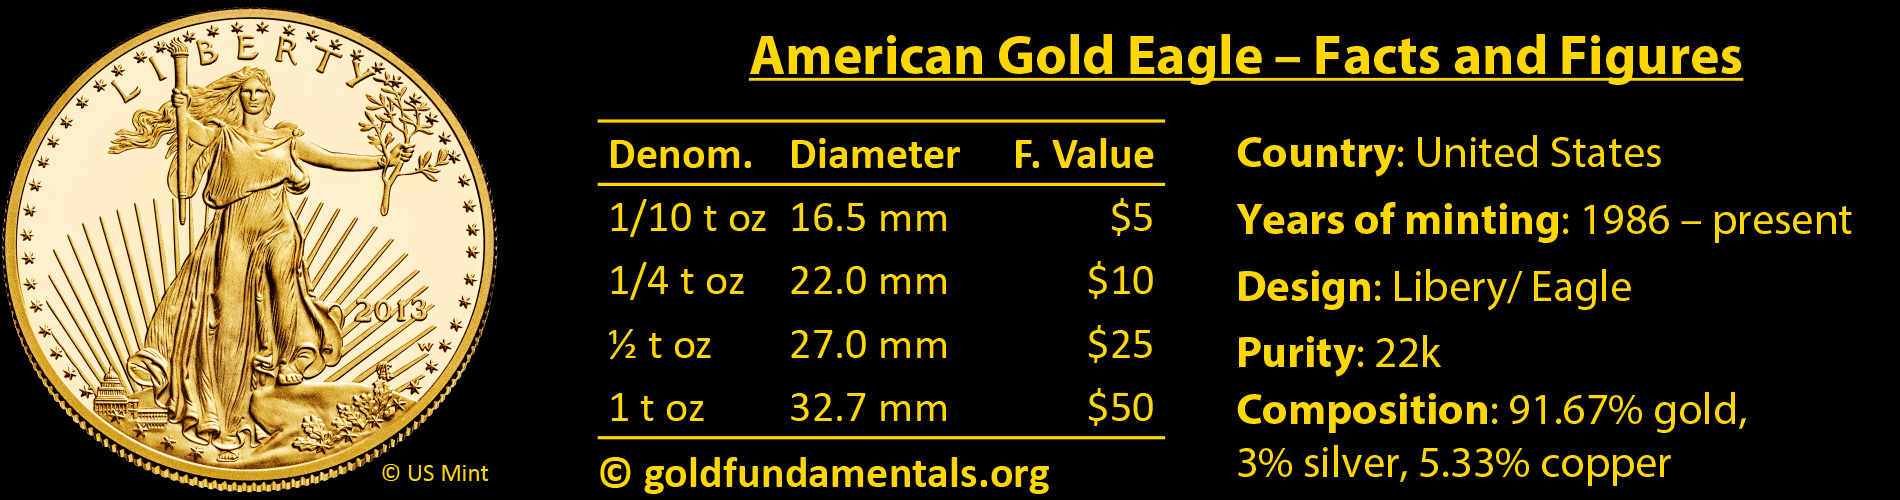 American Gold Eagle - Facts and Figures.